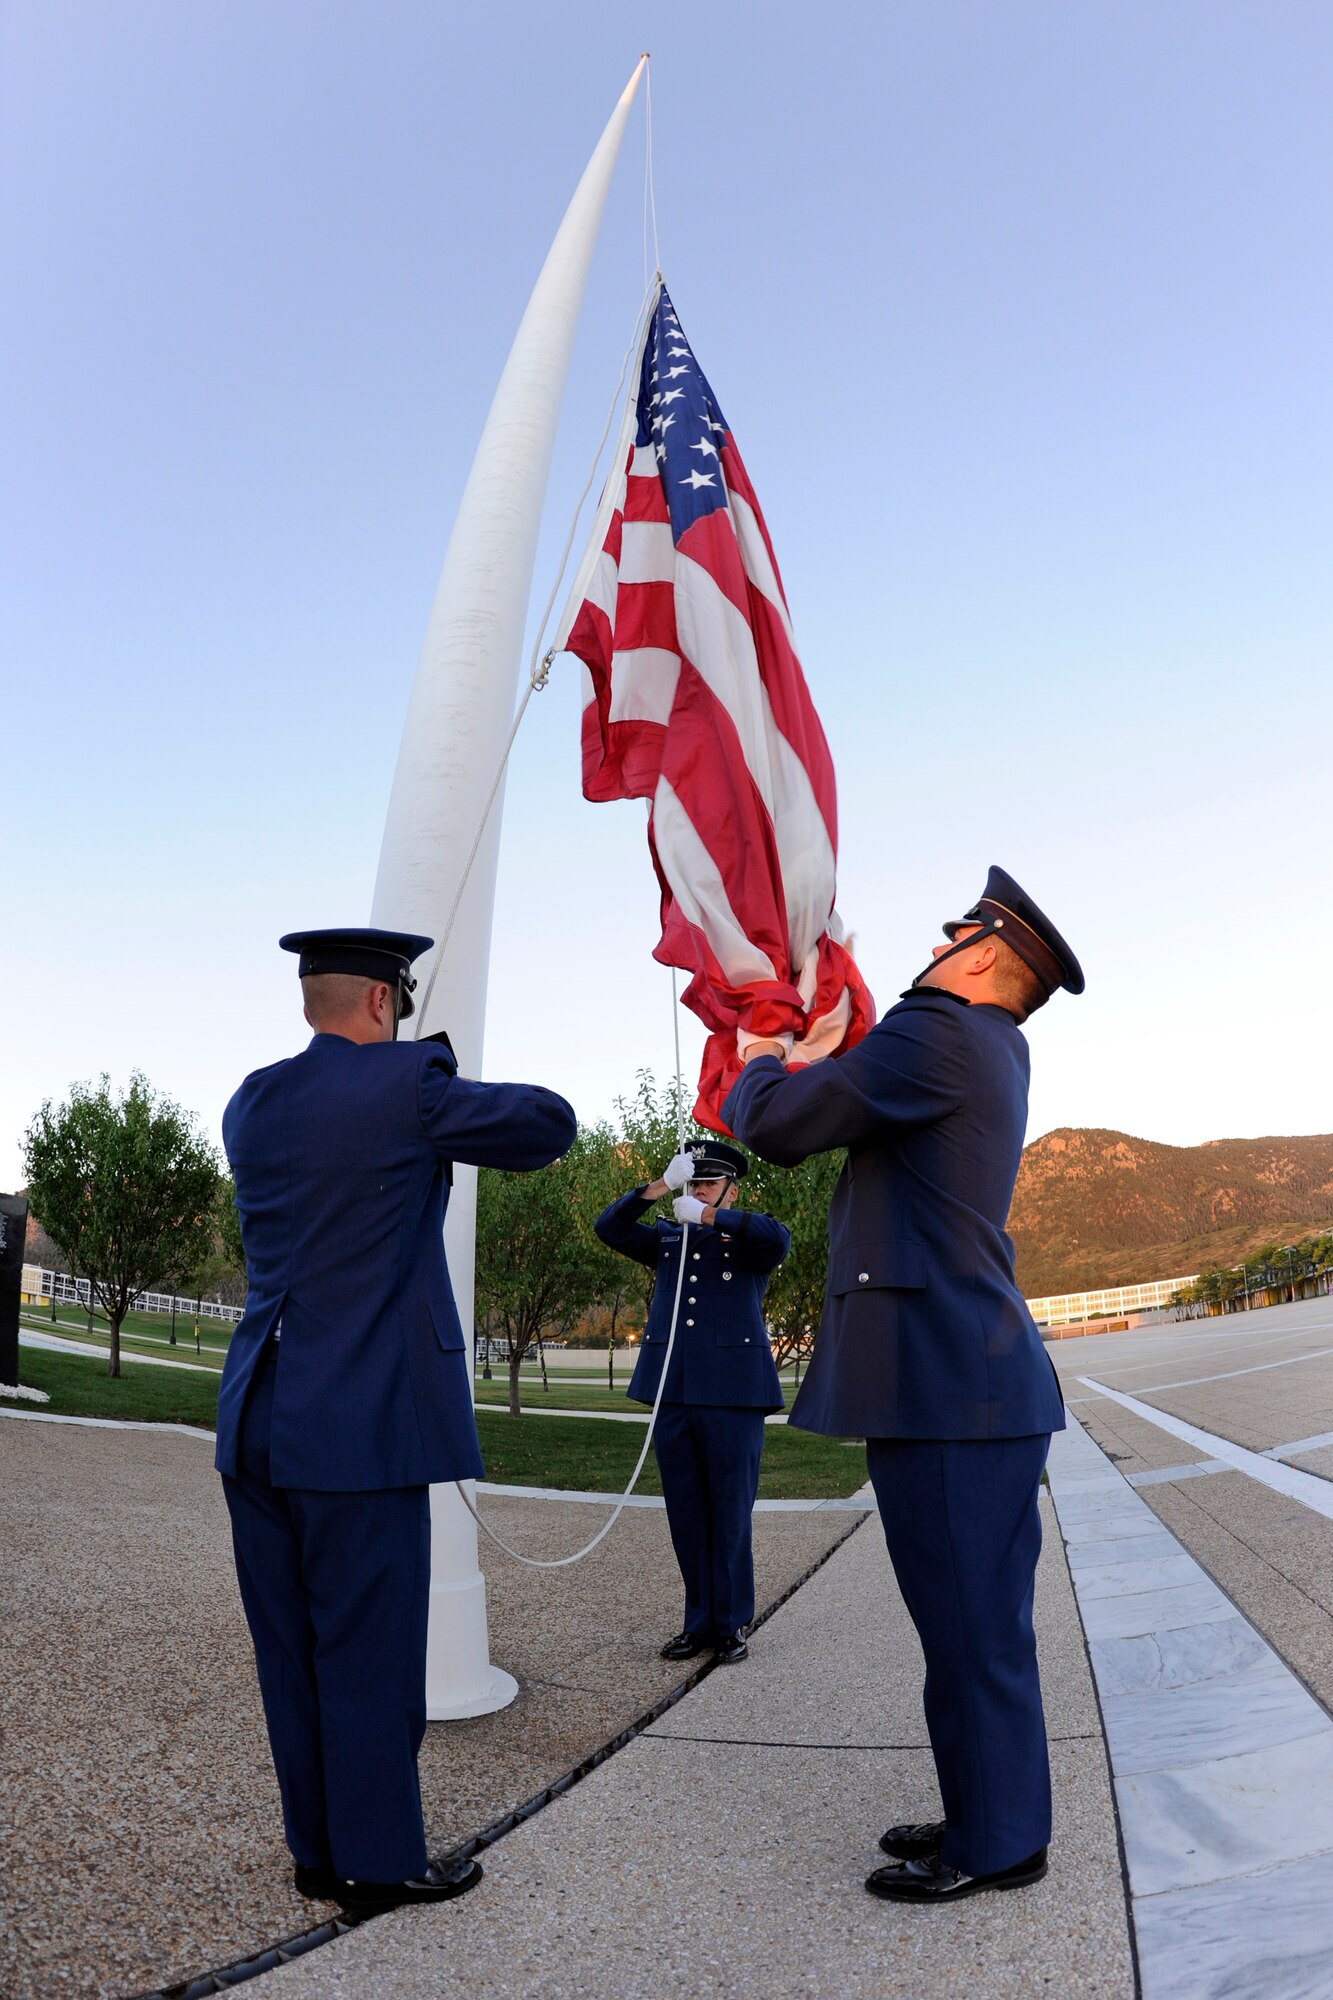 A cadet honor guard prepares to raise an American flag at the Air Force Academy during a reveille ceremony in memory of Cadet 1st Class Marc Henning Sept. 28, 2010. The Academy and Cadet Henning's family held a memorial service at the Cadet Chapel the same day. (U.S. Air Force photo/Mike Kaplan)